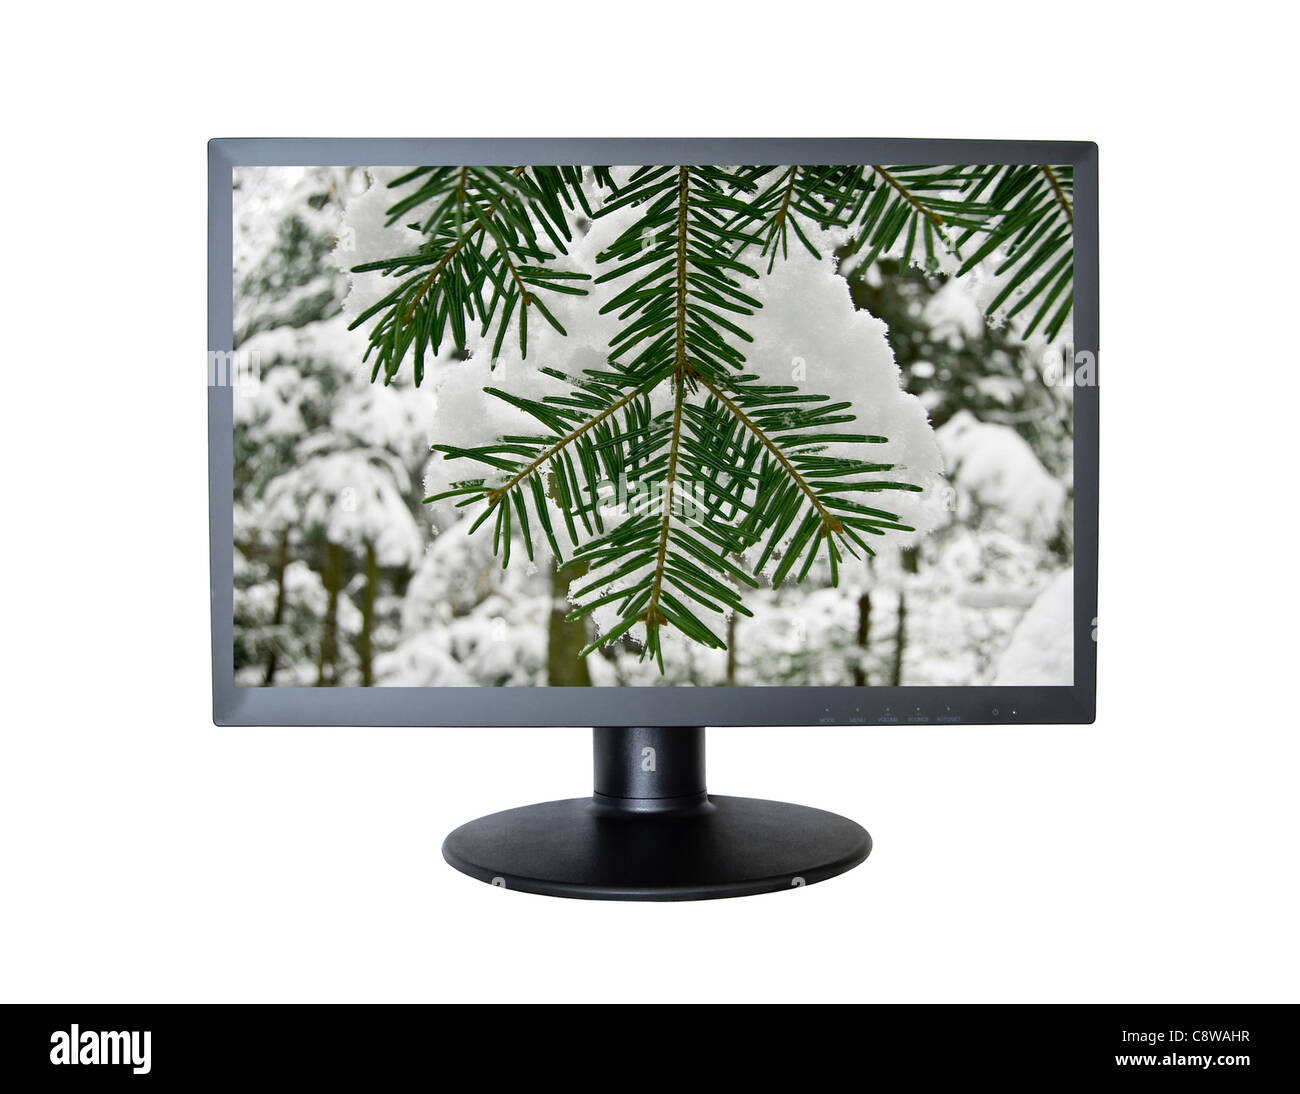 pine tree covered with frost in computer screen Stock Photo